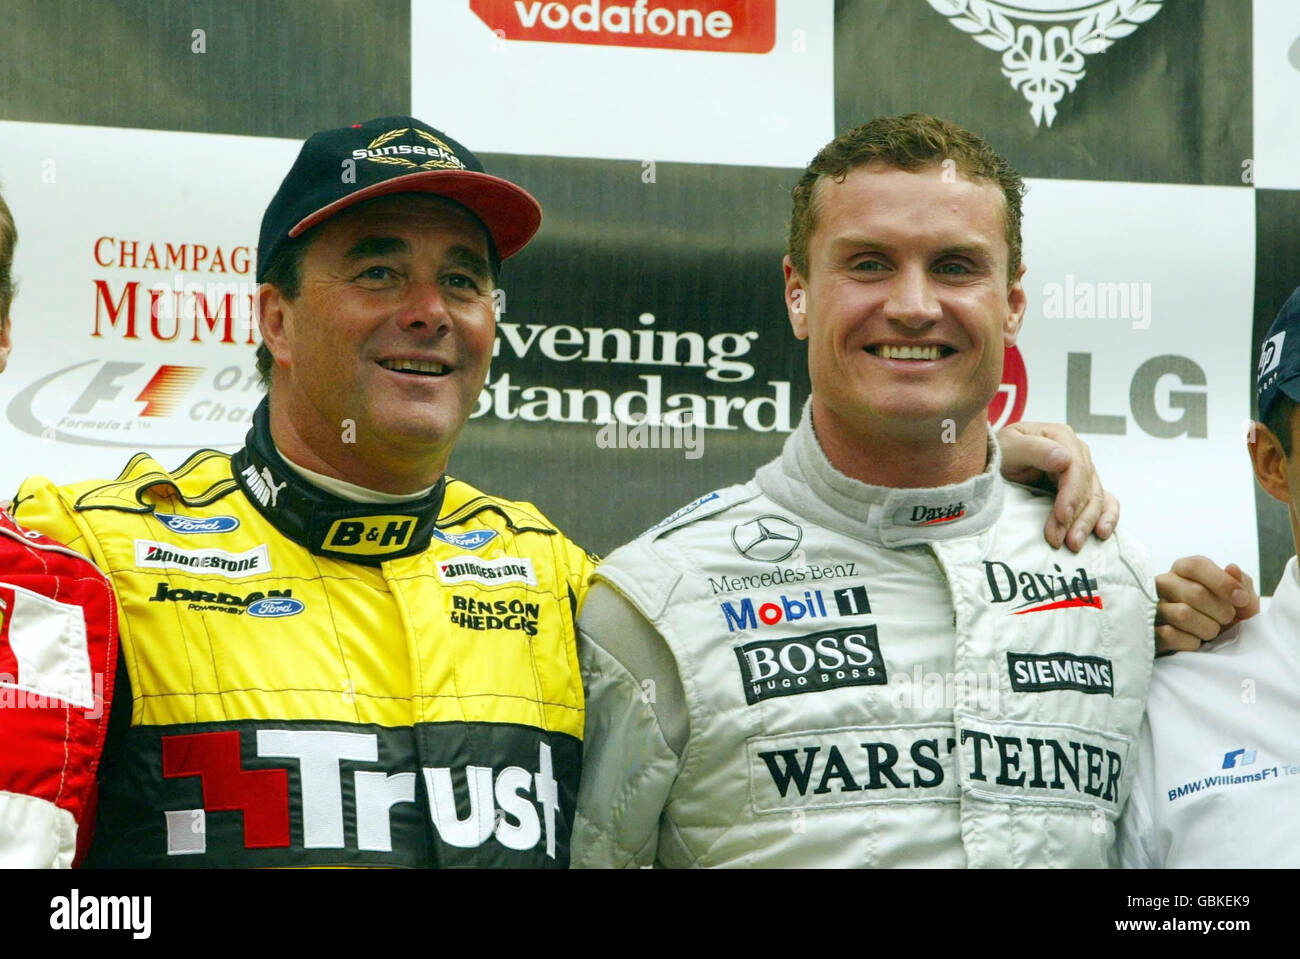 Former F1 World Champion Nigel Mansell and current F1 driver David Coulthard stand on the podium in London's Regent Street, before a race around a section of the West End. Competitors from eight teams, including Ferrari, Williams, BAR and Jordan, will join a procession along the route which is designed to raise interest in this weekend's British Grand Prix and strengthen calls for London to be considered as a possible site for a future city-based race. Stock Photo